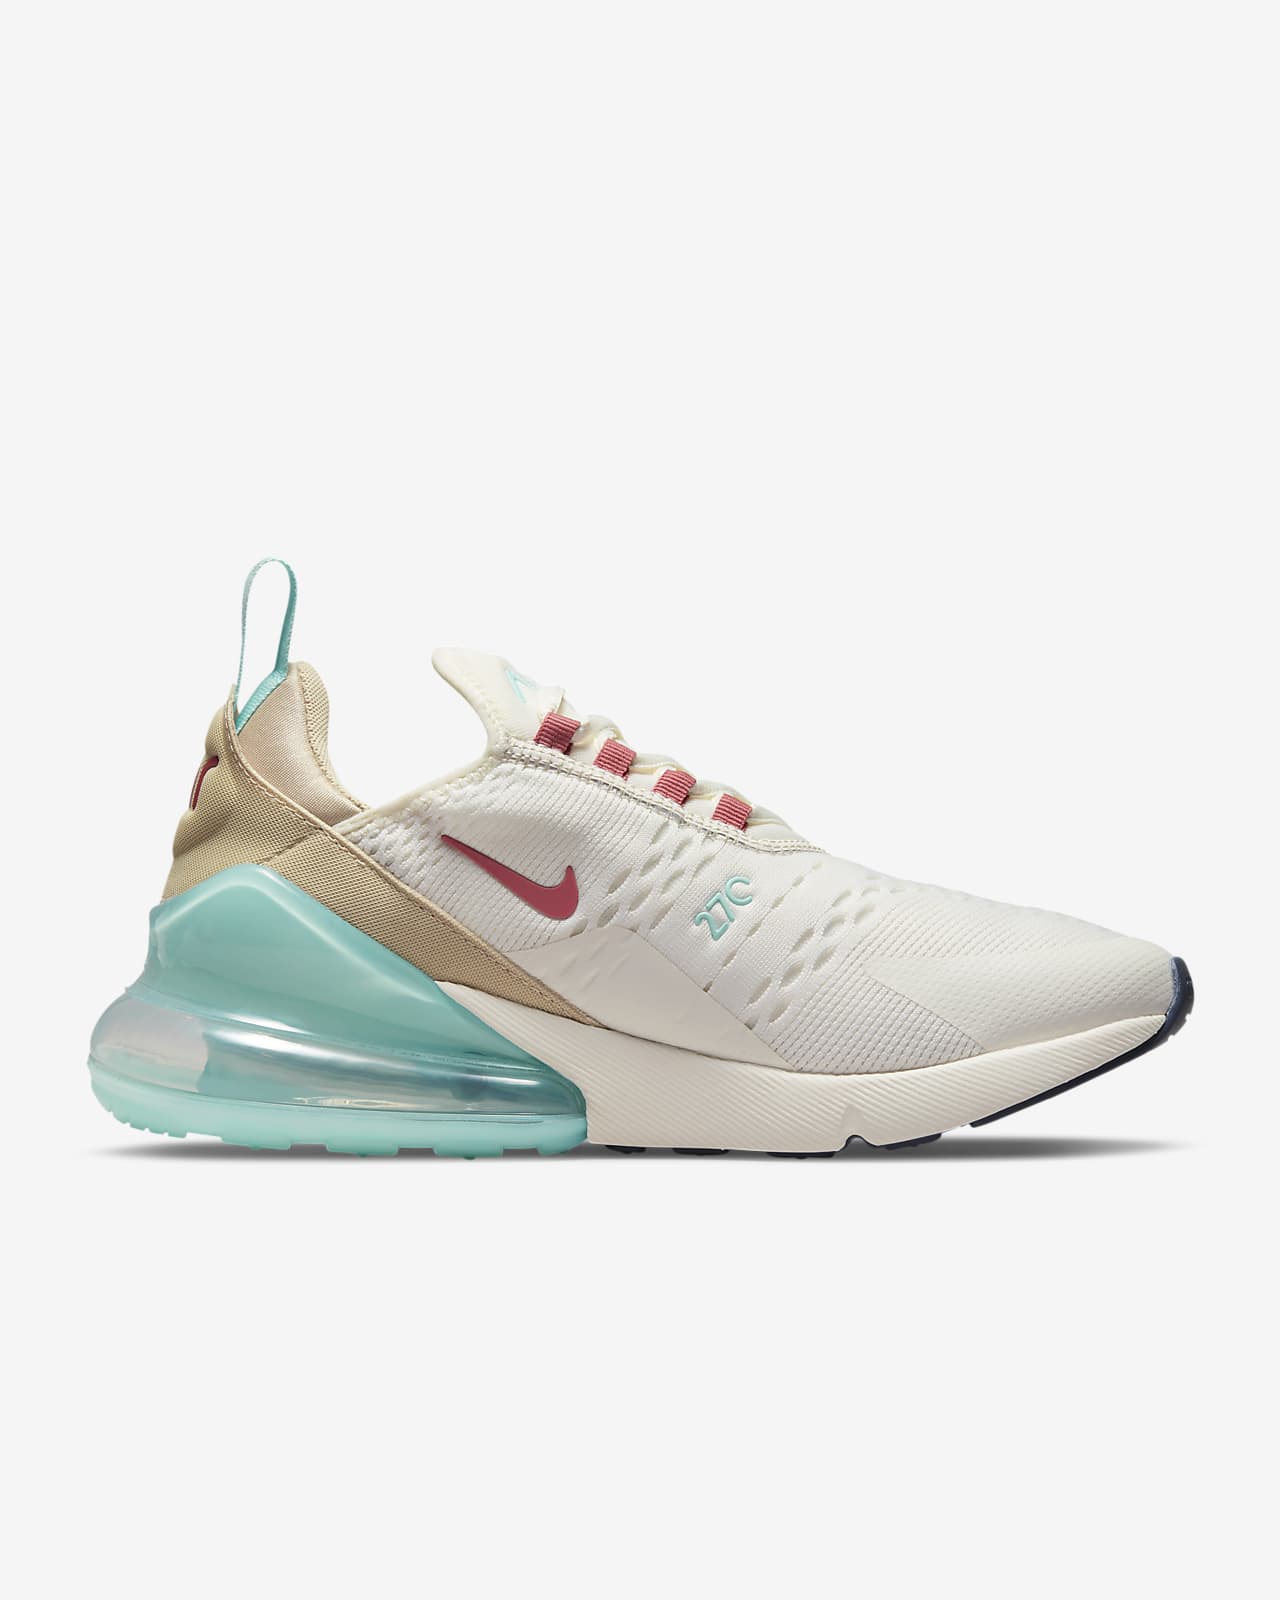 Nike Air Max 270 Women's Shoes طباعة فواتير